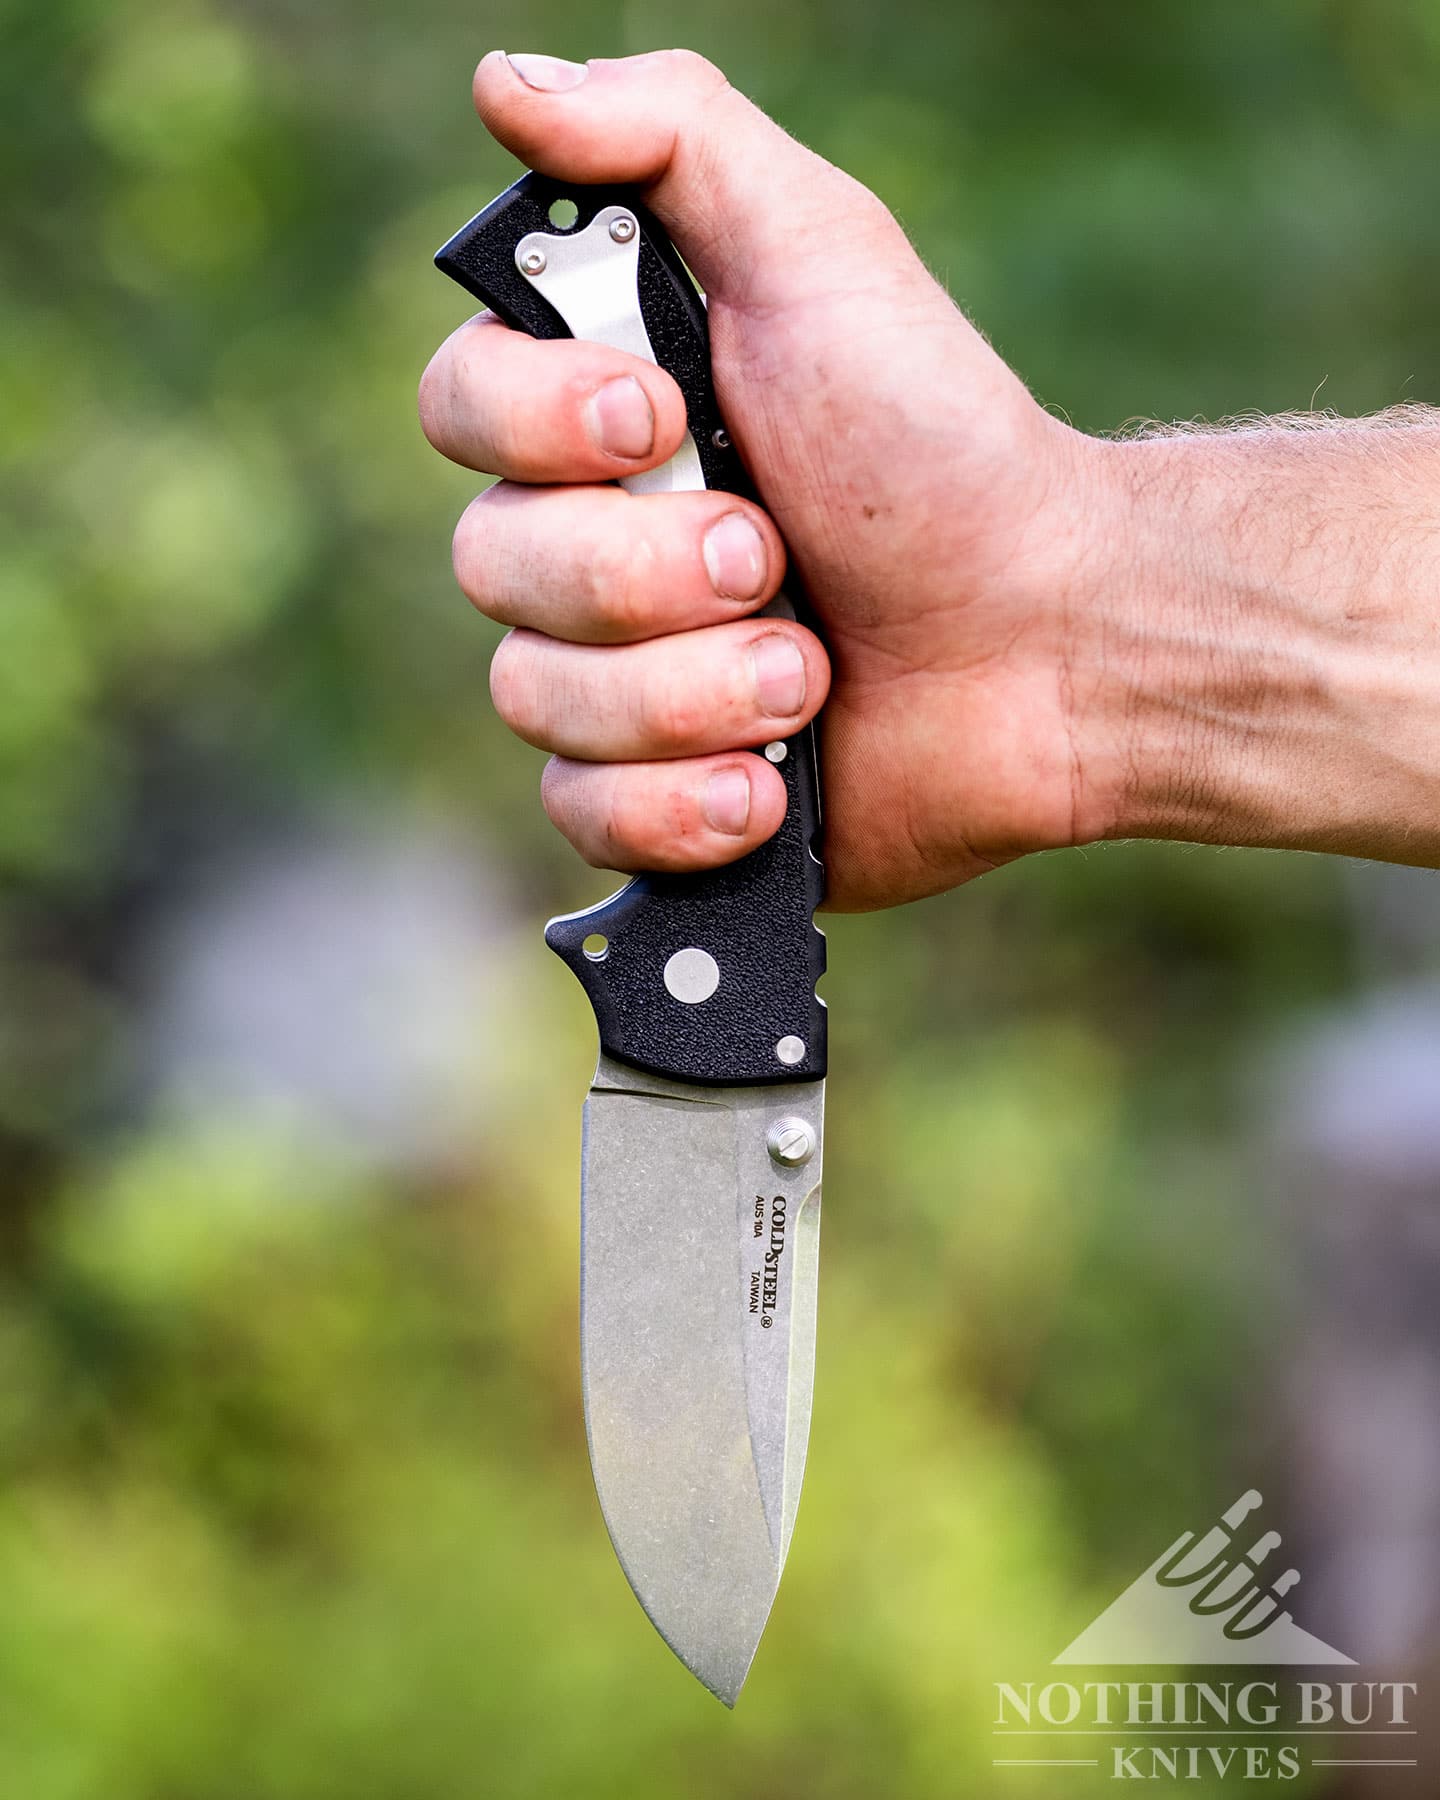 The Cold Steel 4-MAX Scout being held in a reverse grip in a person's right hand.